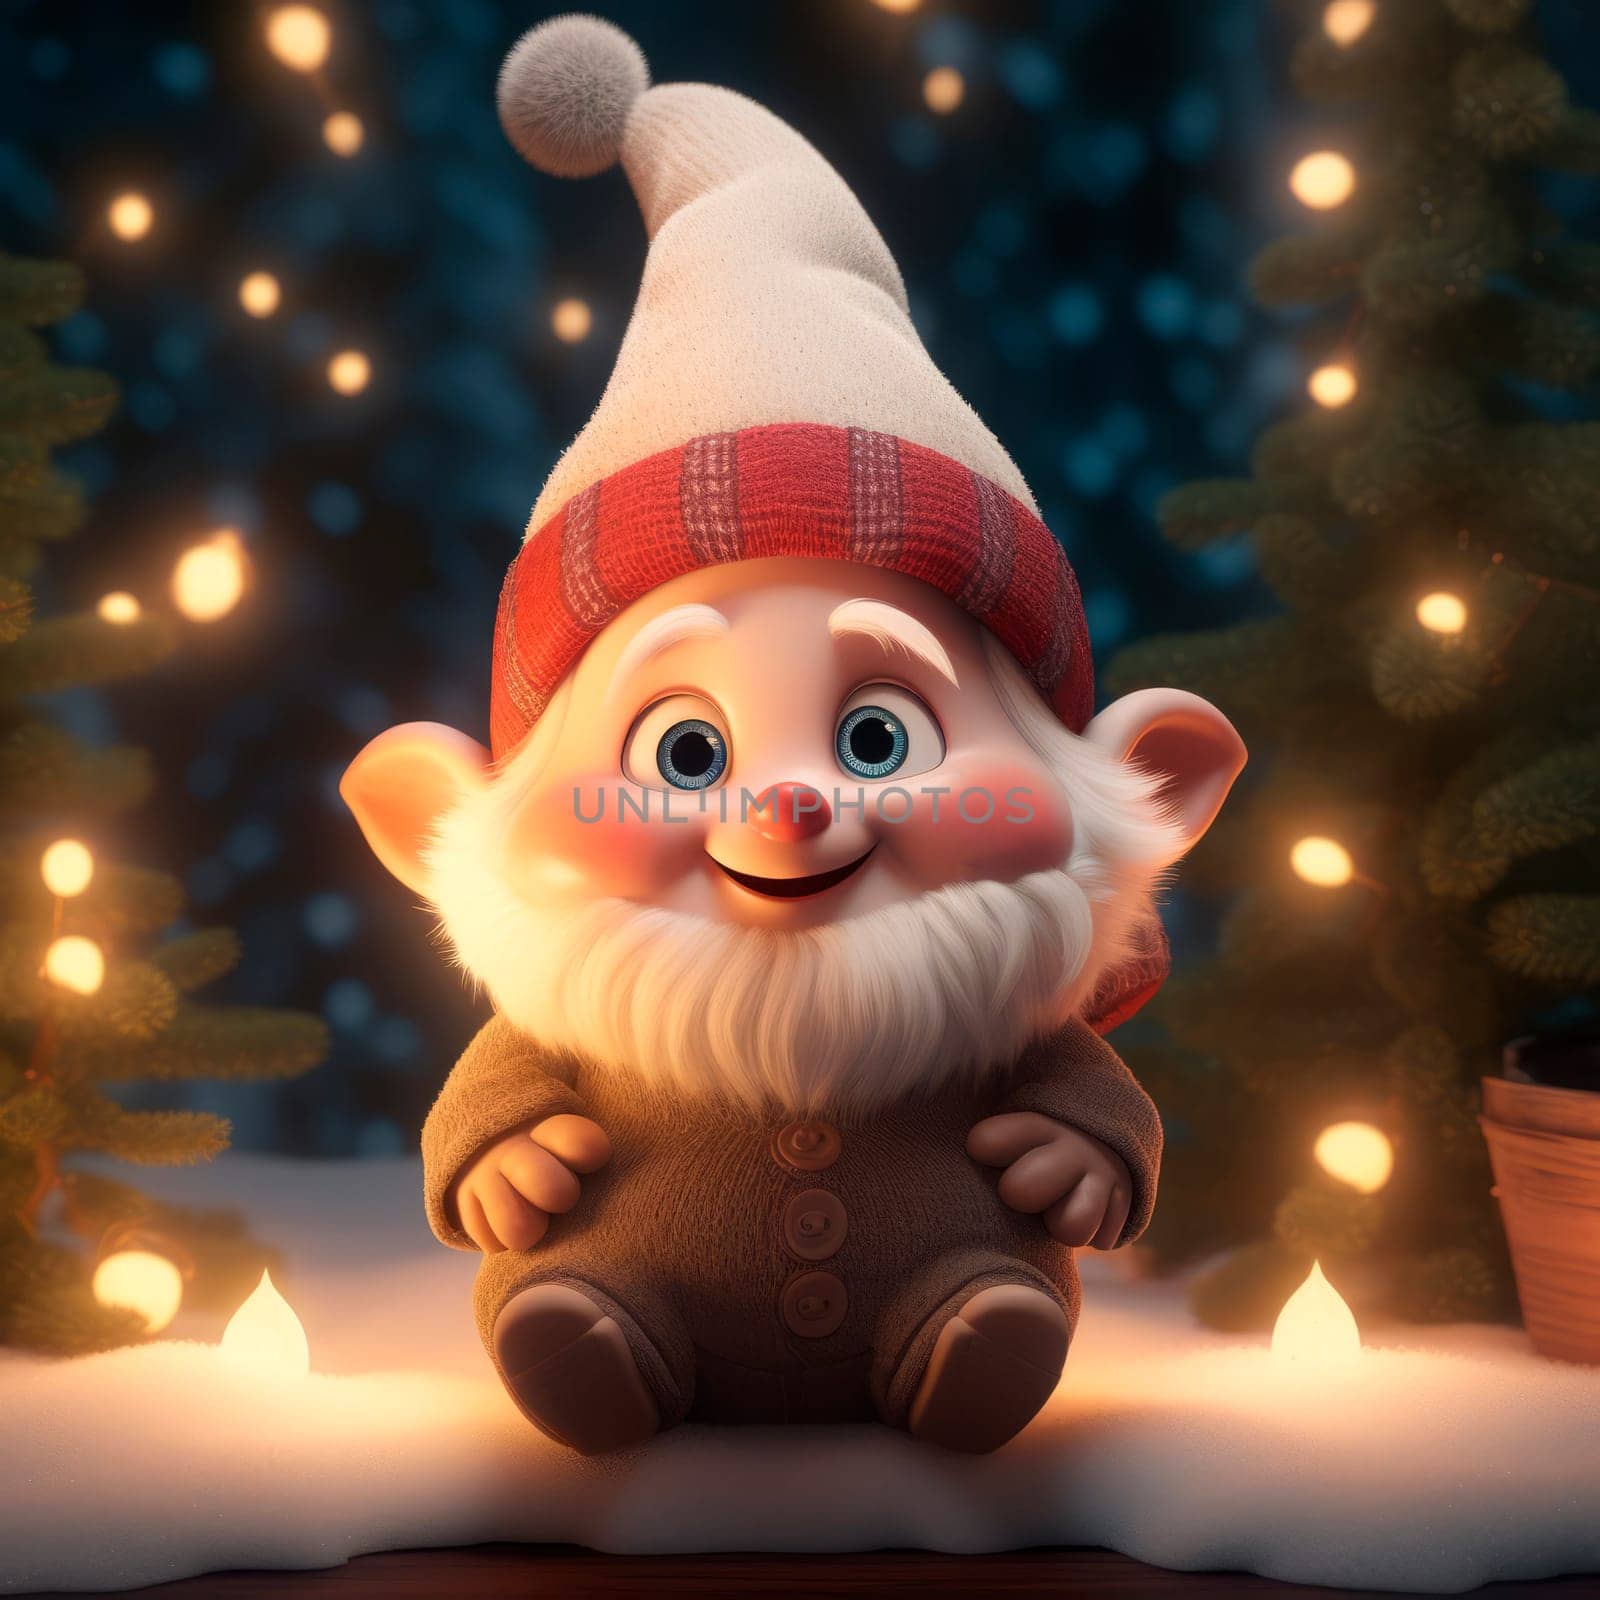 Cute Christmas Gonks on the background of a Christmas picture by Spirina